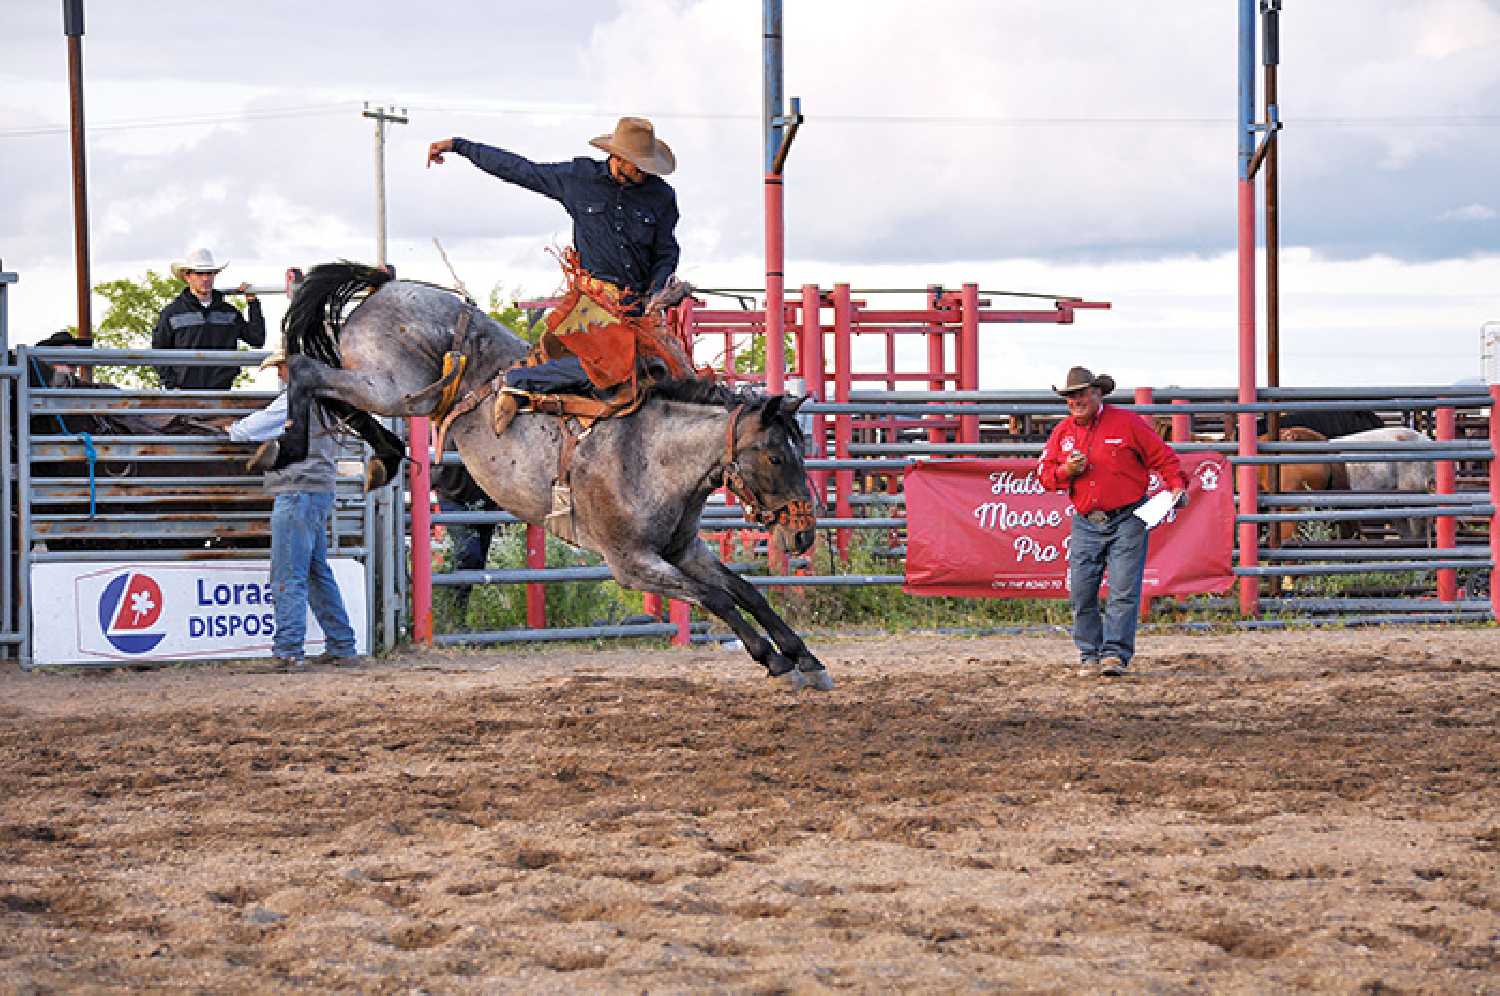 Above is a photo of one of the rodeo performances from Kennedy’s weekend rodeo event in July, 2022.